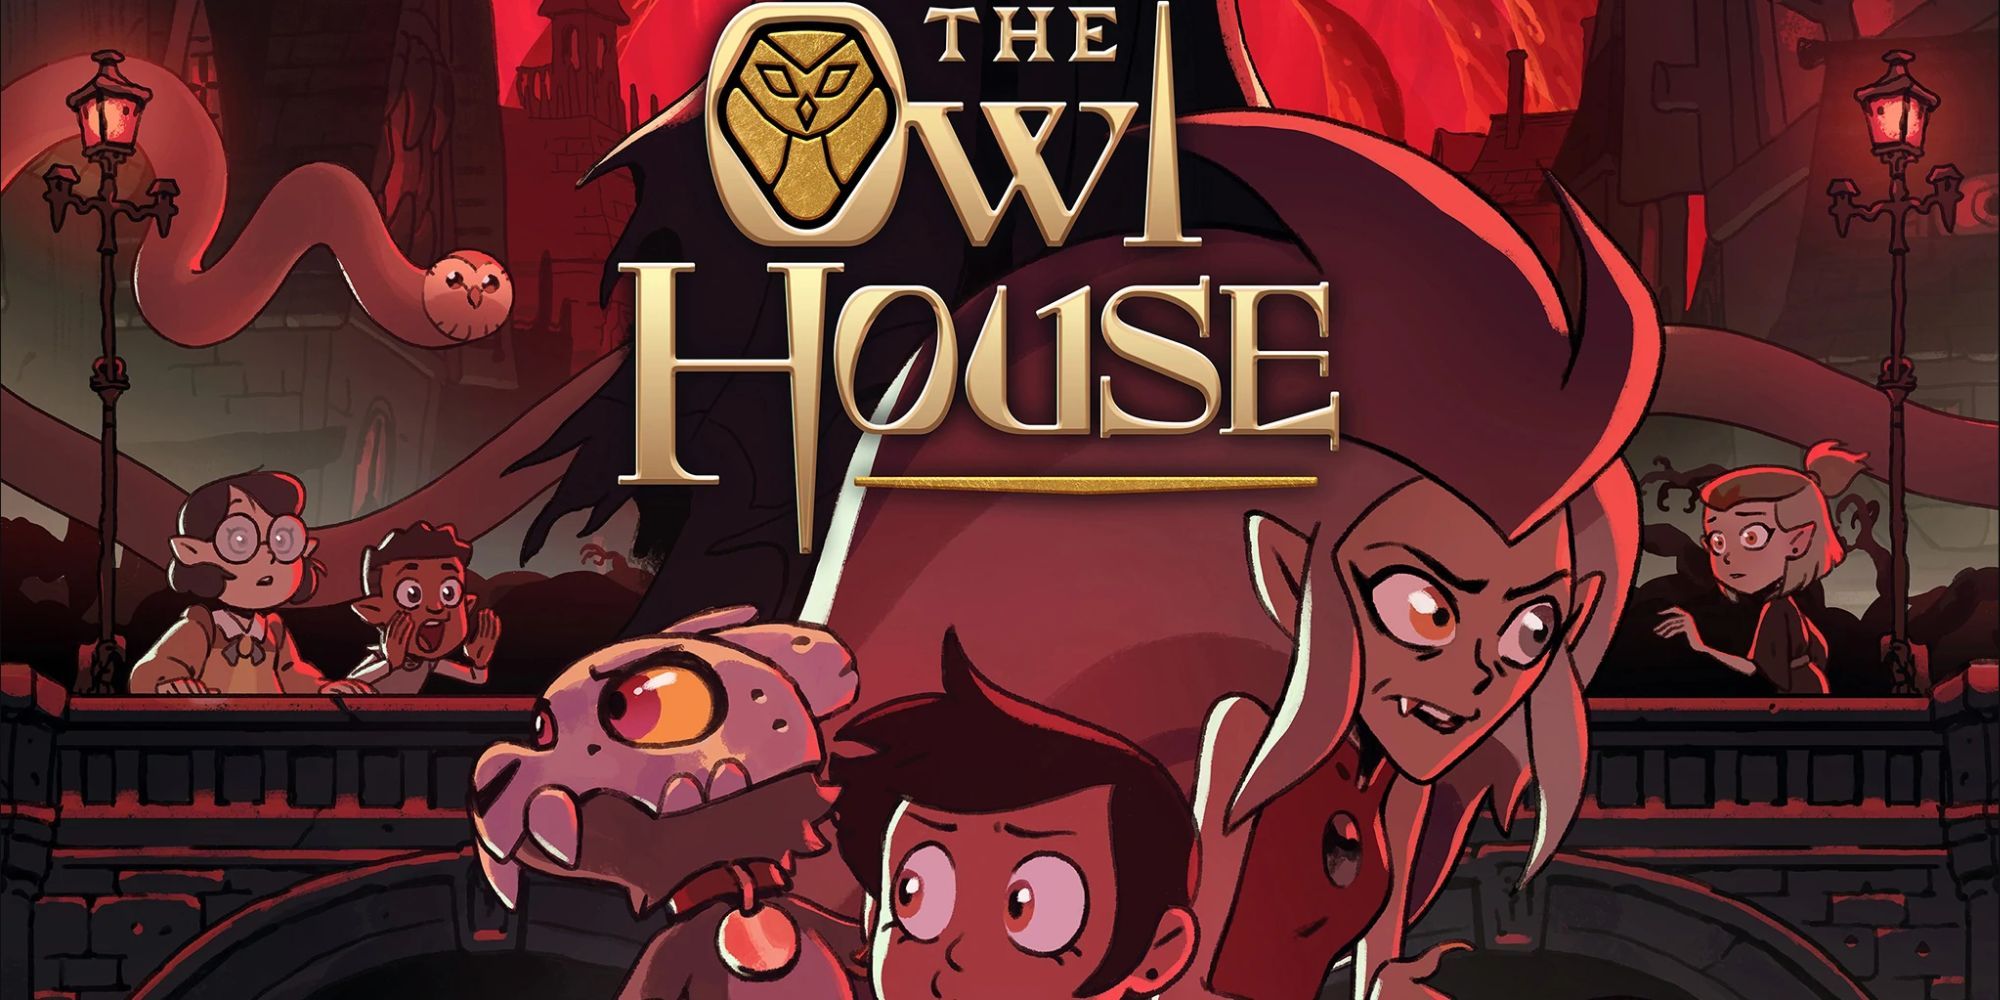 When is The Owl House season 2 premiere? Release date announced by Disney